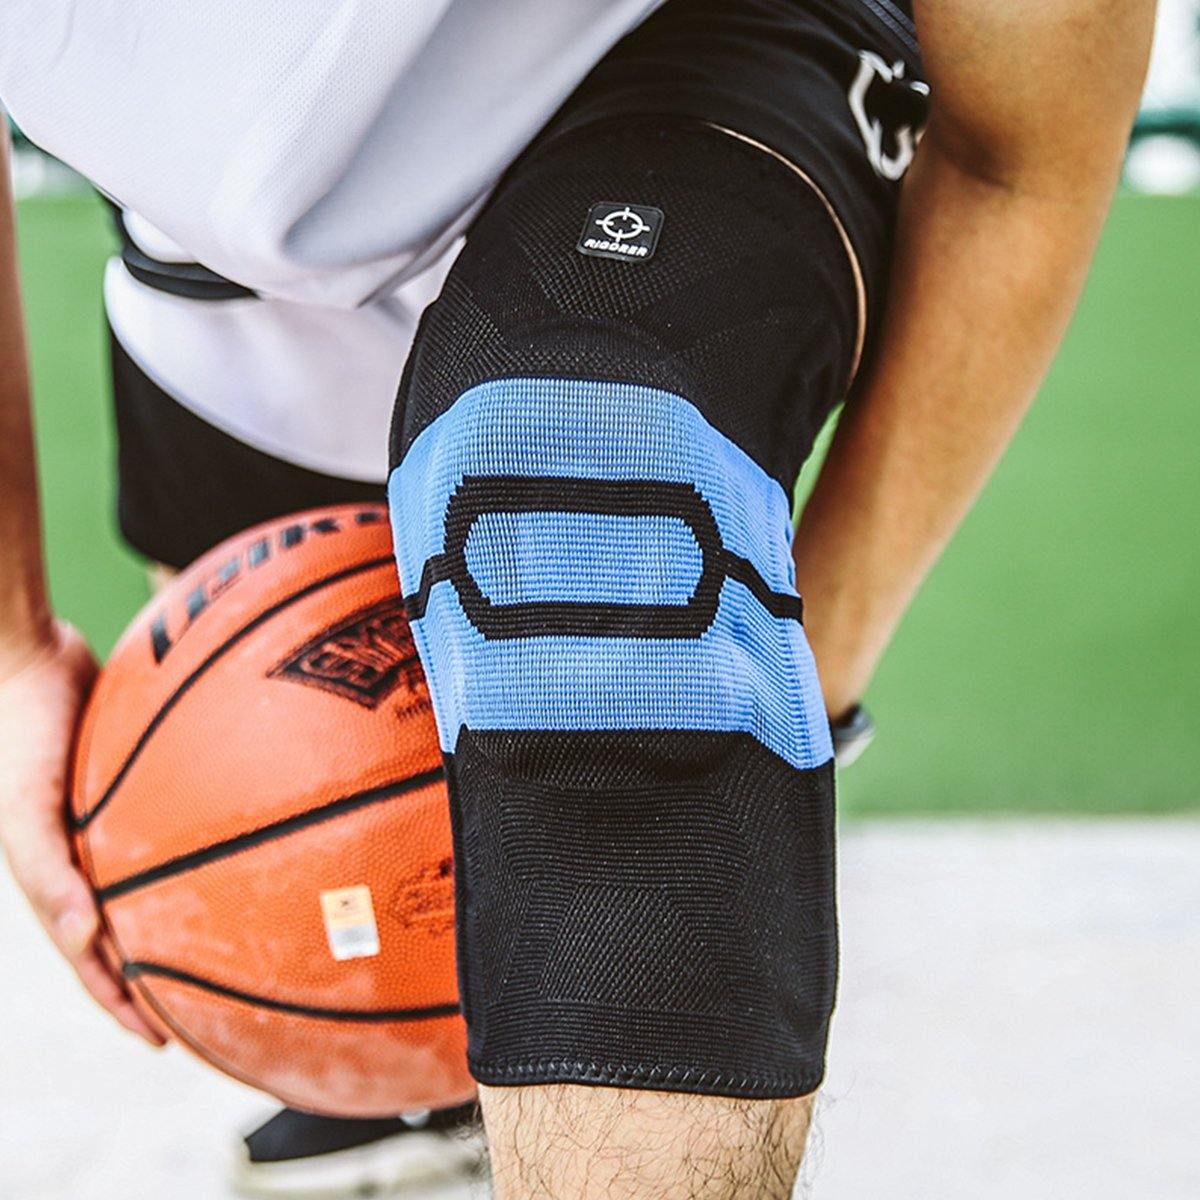 Knee Brace Silicone Anti-Skid Strip Mluti-Functional Fabric - Rigorer Official Flagship Store